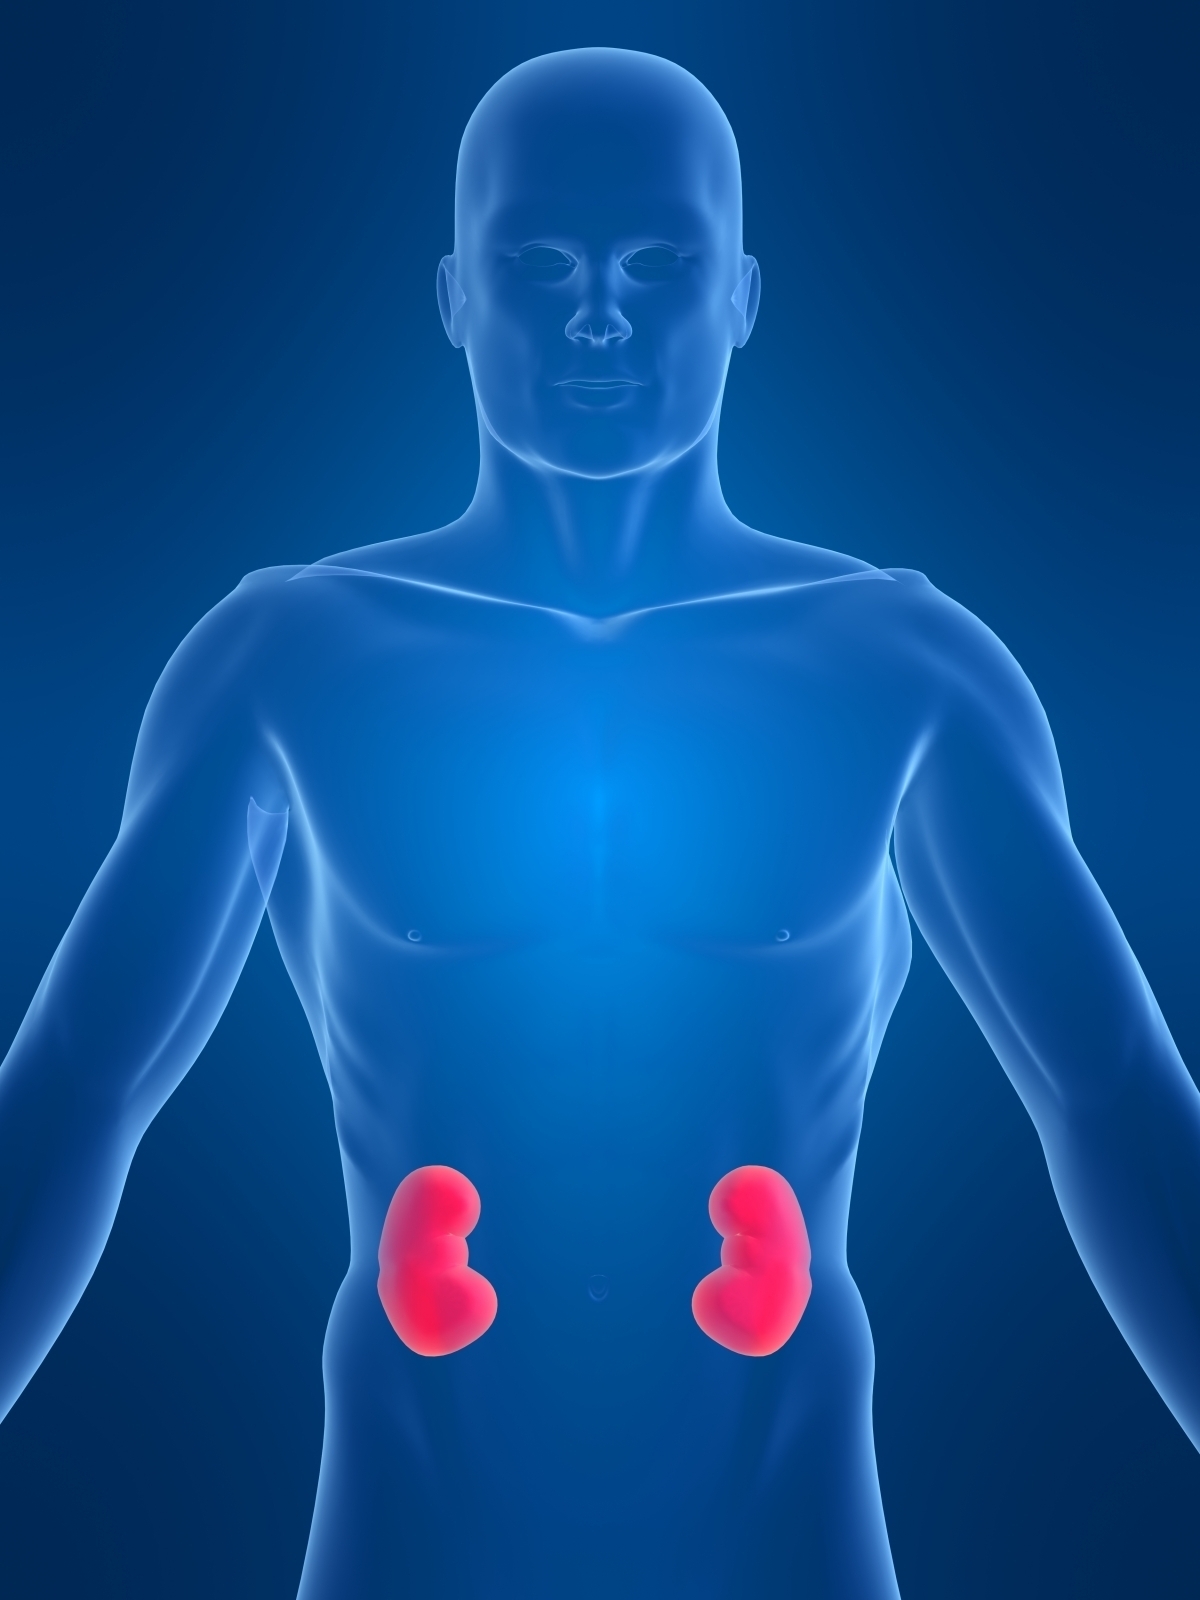 can lasix cause kidney damage